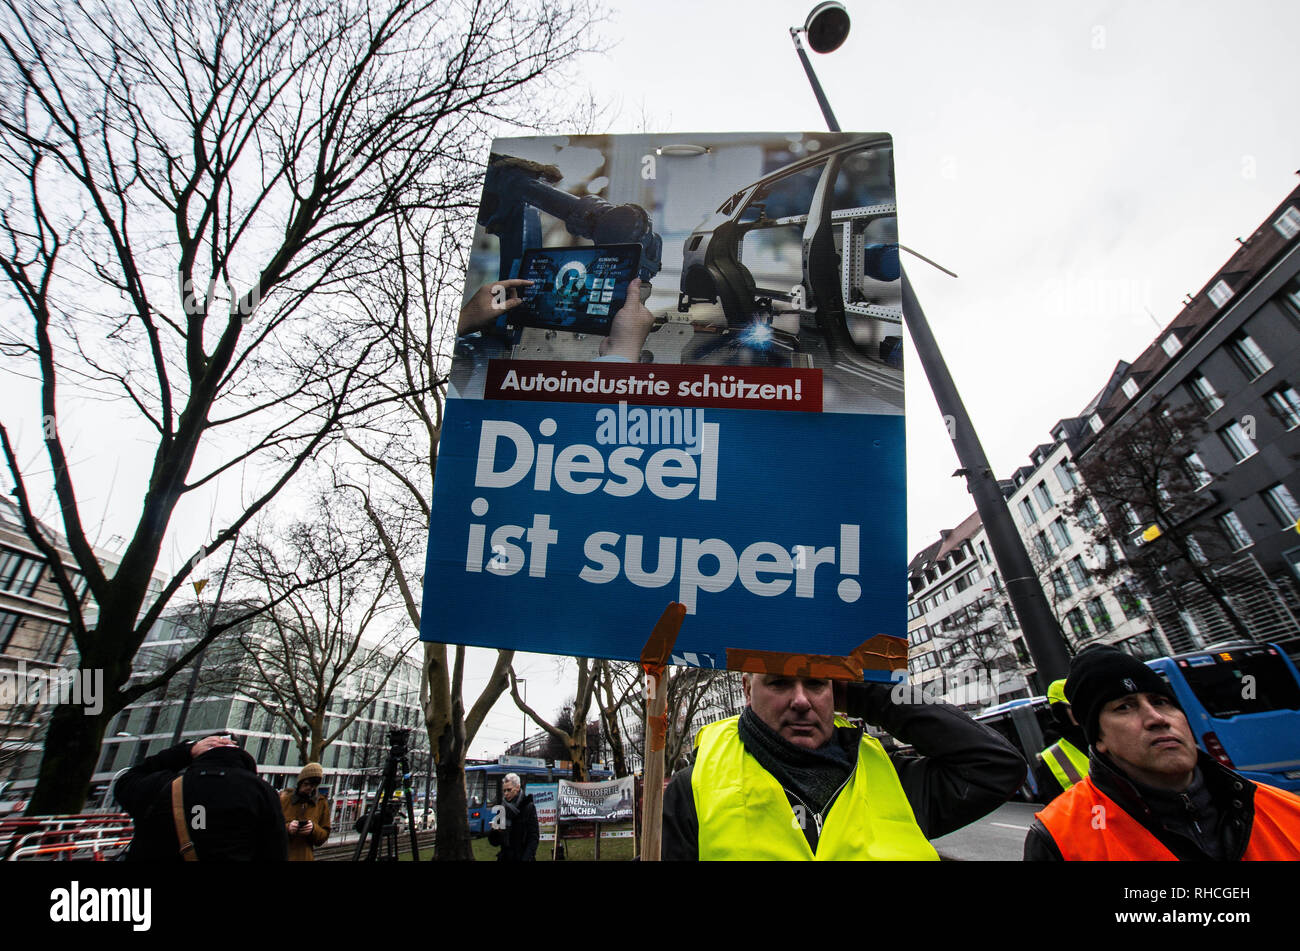 Munich, Bavaria, Germany. 2nd Feb, 2019. A poorly hidden sign from the far-right Alternative for Germany party was displayed at the demonstration. Responding to the prospect of diesel auto bans in major cities in Germany, protestors assembled at an air quality monitoring station in Munich's city center. Credit: ZUMA Press, Inc./Alamy Live News Stock Photo